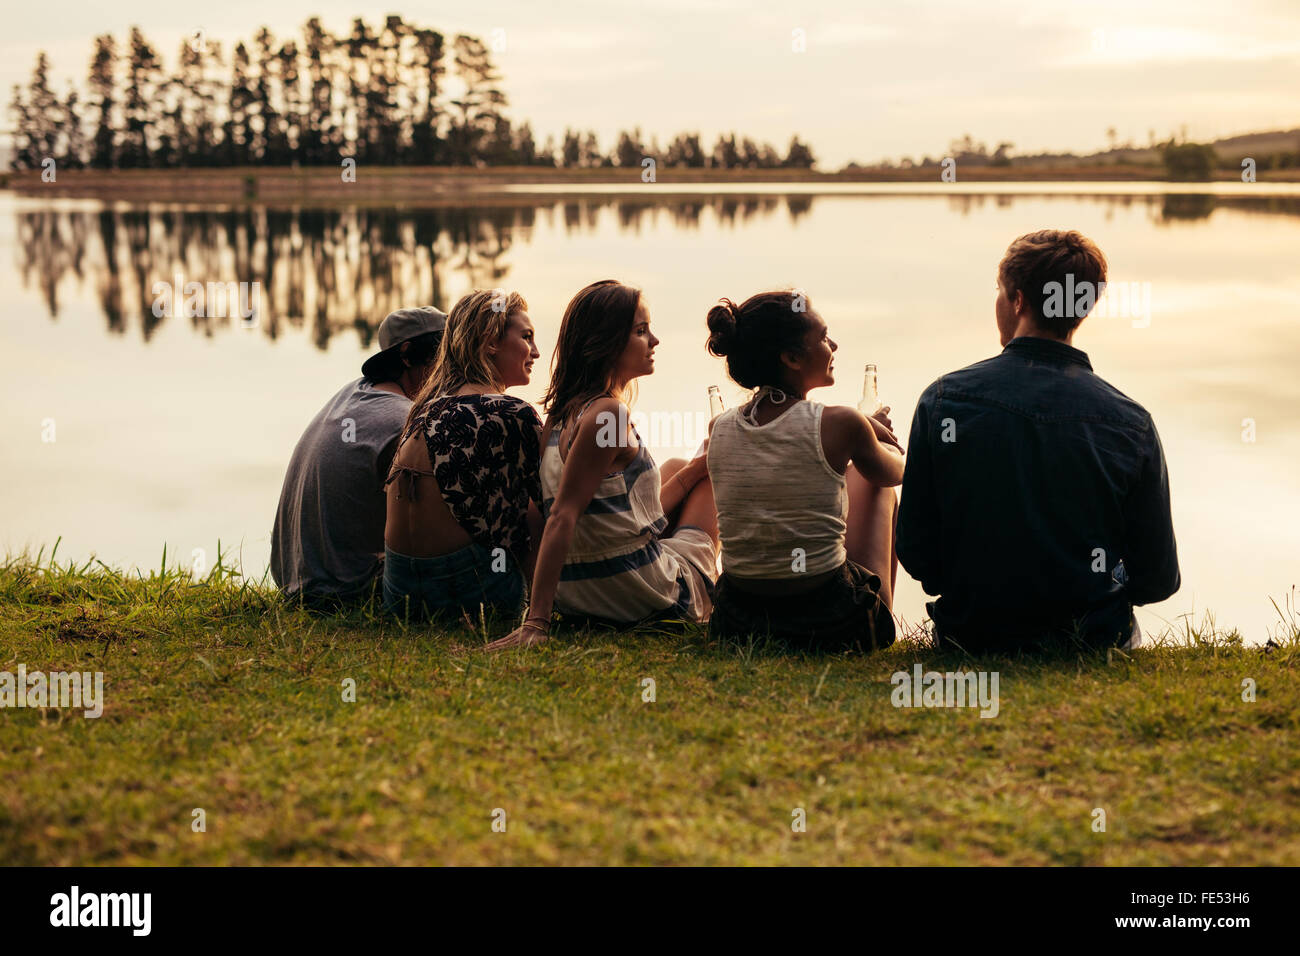 Rear view portrait of group of young friends relaxing by a lake. Young people sitting together by a lake. Stock Photo